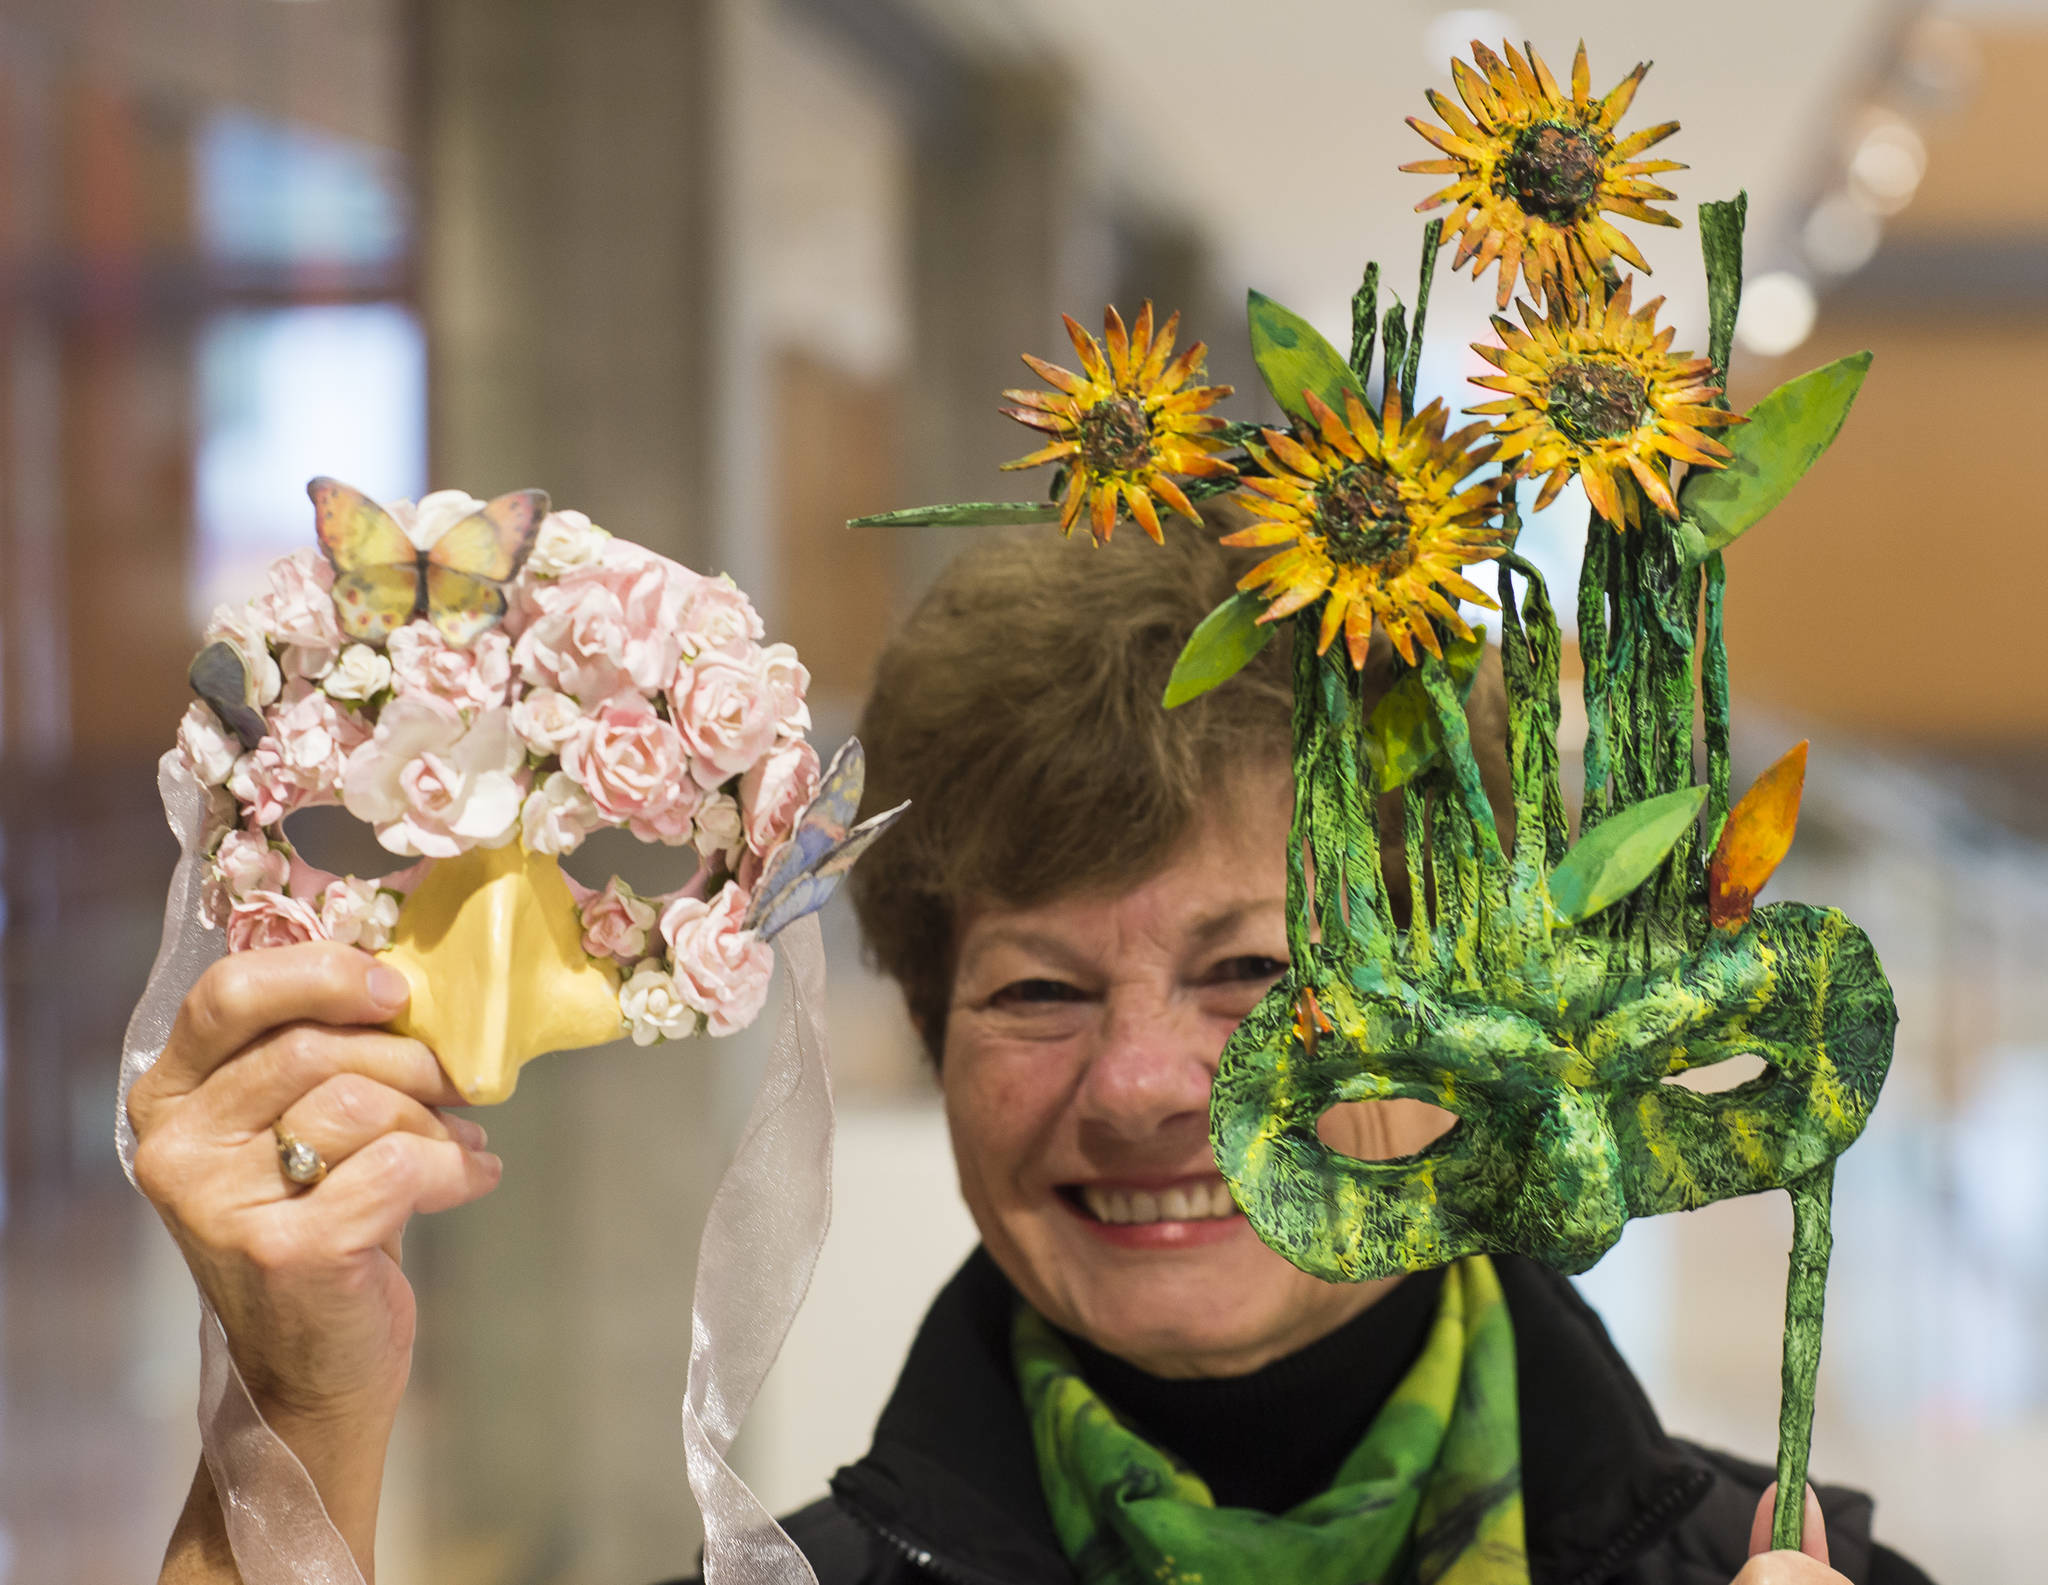 Mary Lou Gerbi, then-president of the Friends of the Alaska State Library, Archives, and Museum, holds two masks, that in October 2018 were autioned off during their Mask-erade event. This year’s event is scheduled for Oct. 19. (Michael Penn | Juneau Empire File)